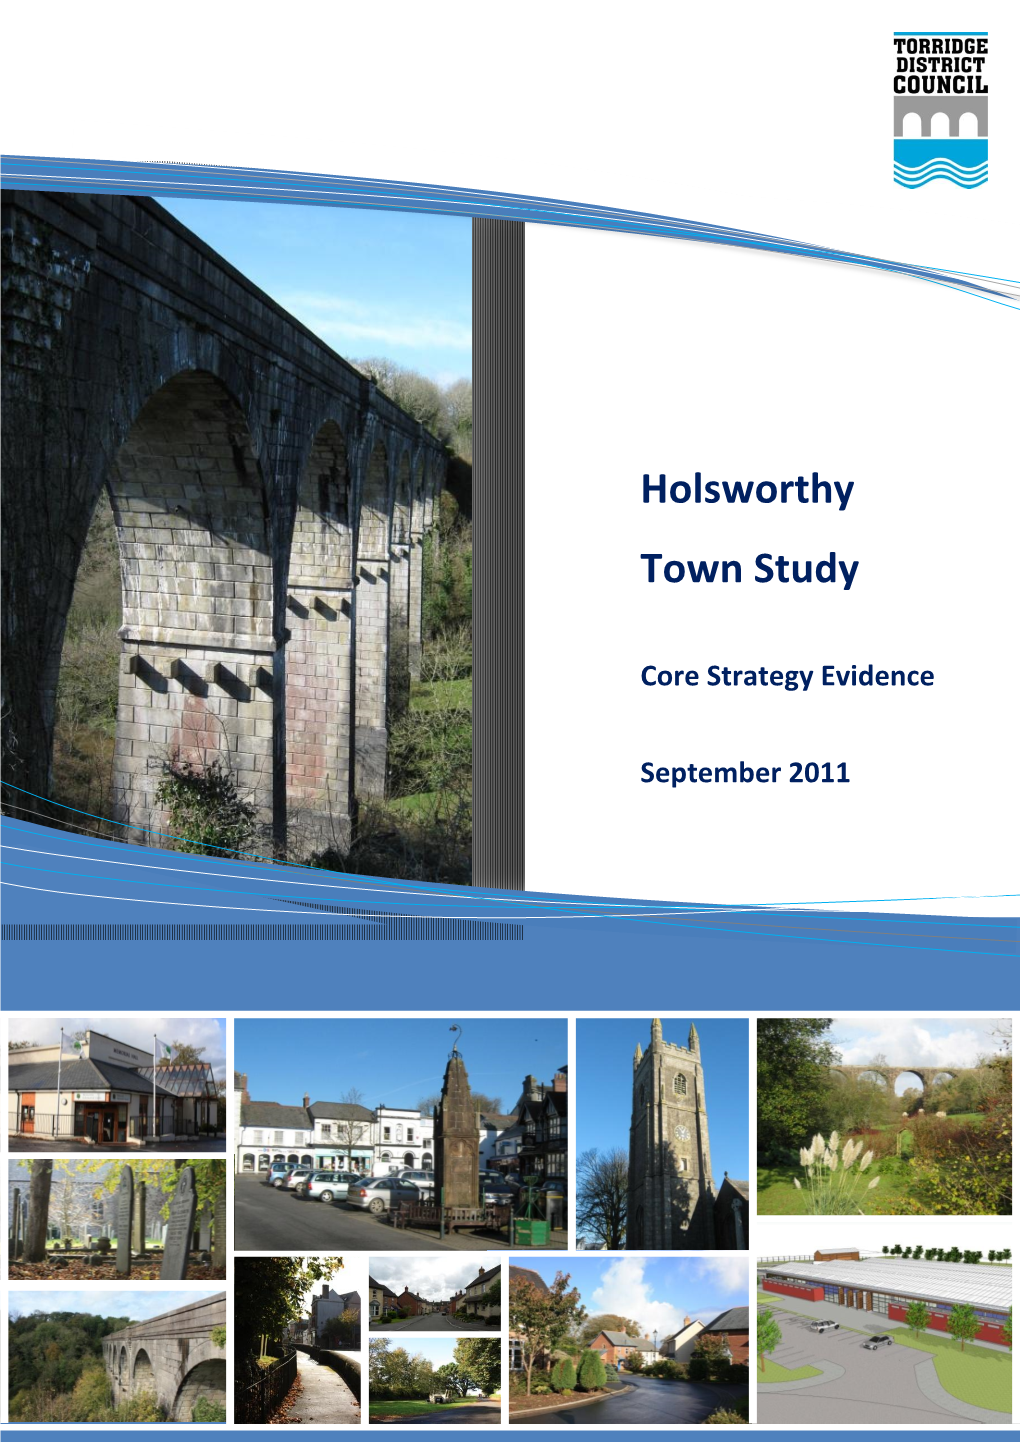 Holsworthy Town Study